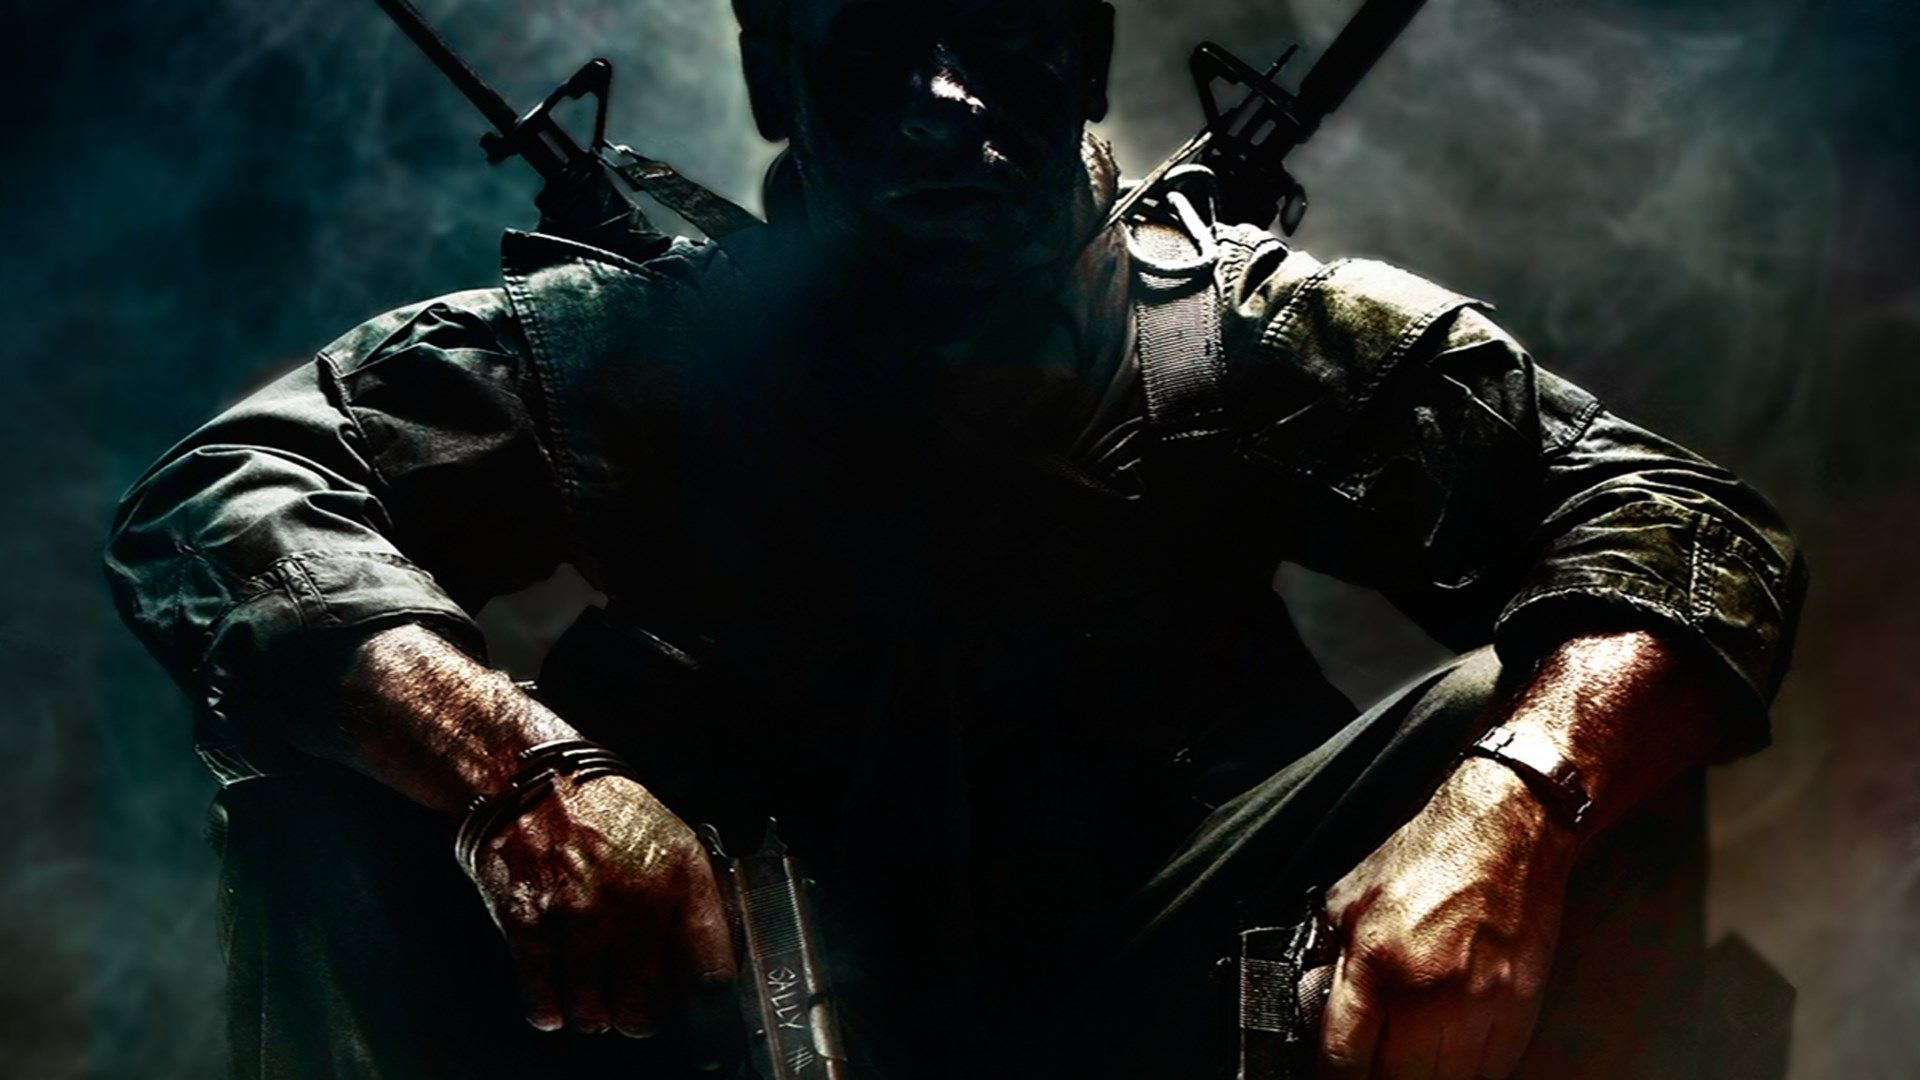 Call Of Duty: Black Ops Cold War will be fully revealed next week. Rock Paper Shotgun